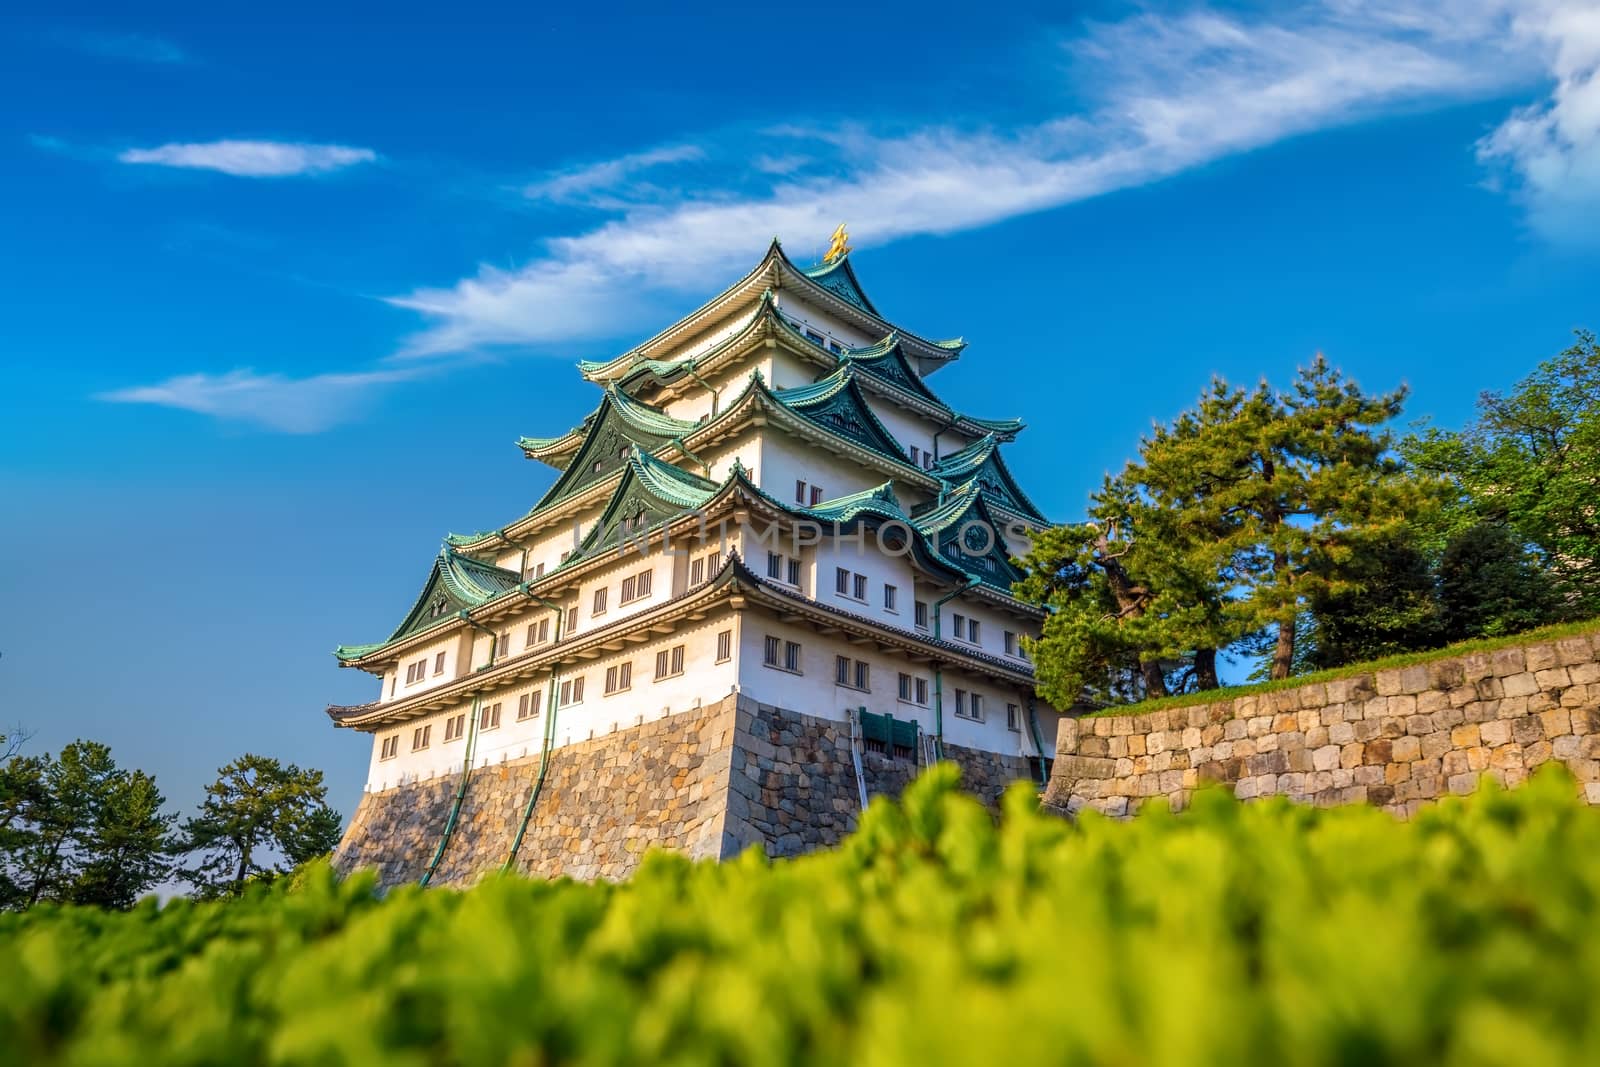 Nagoya Castle and city skyline in Japan by f11photo